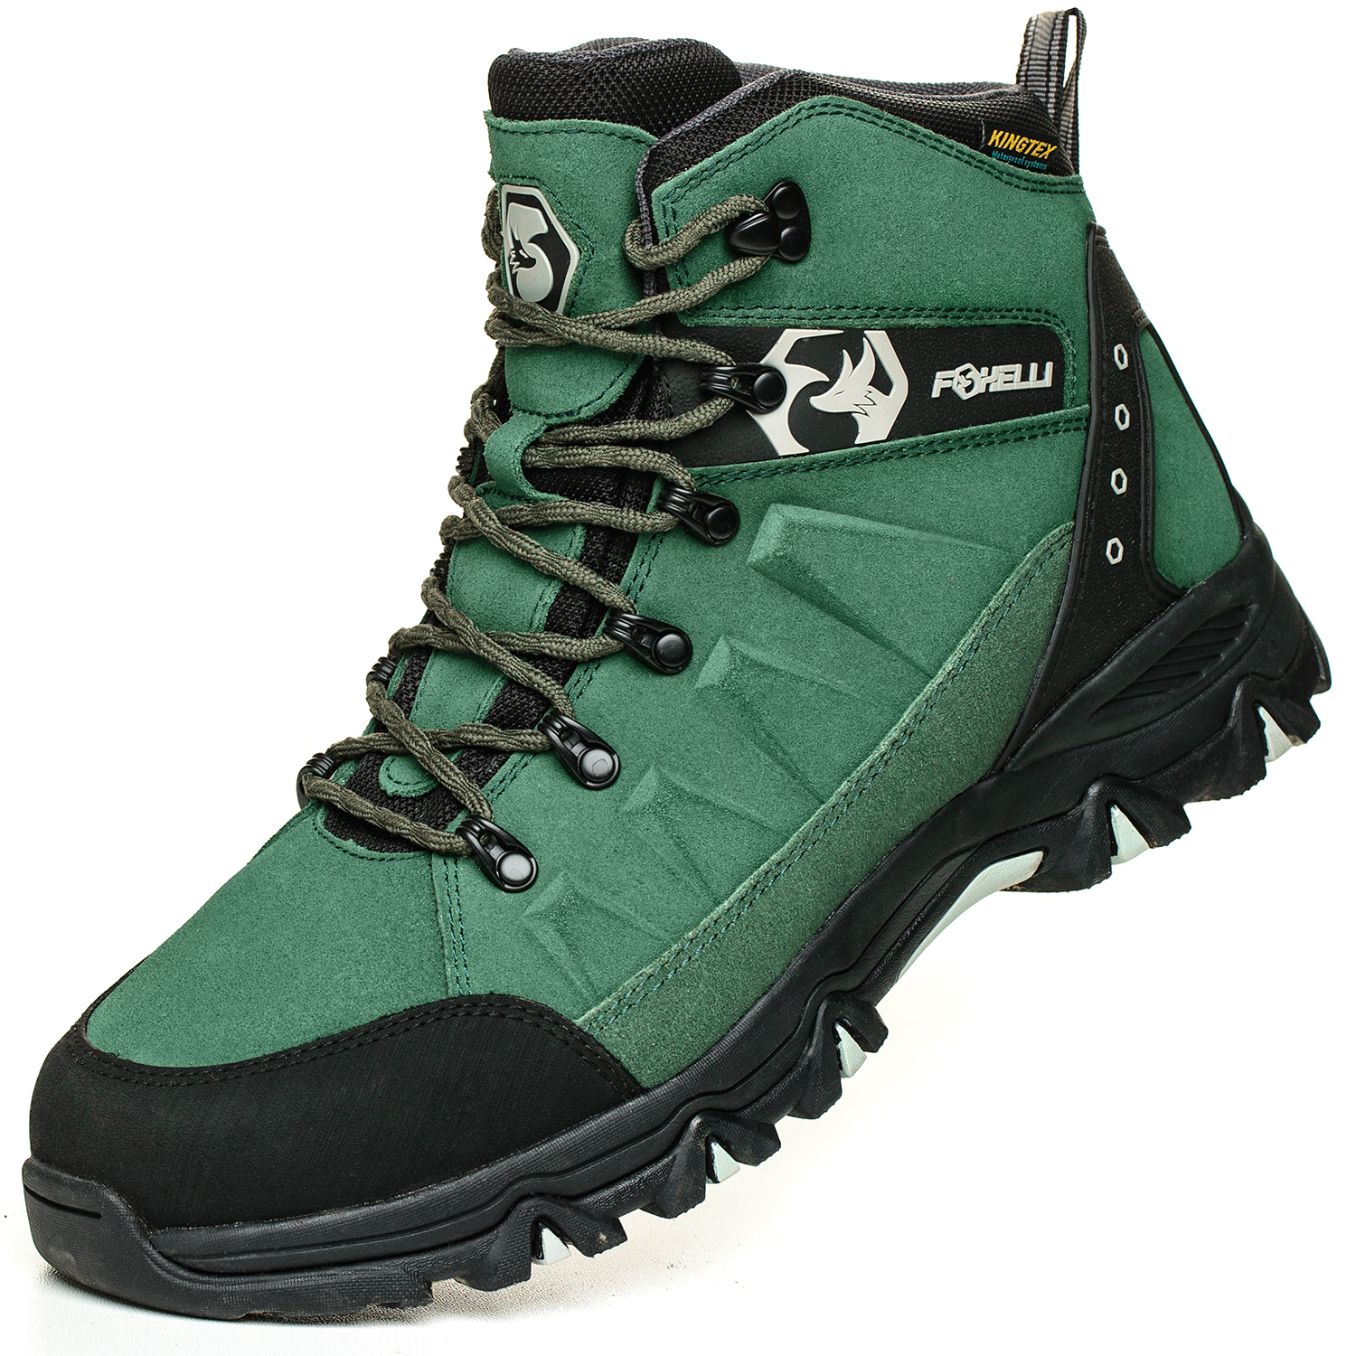 Foxelli Hiking Boots For Men 